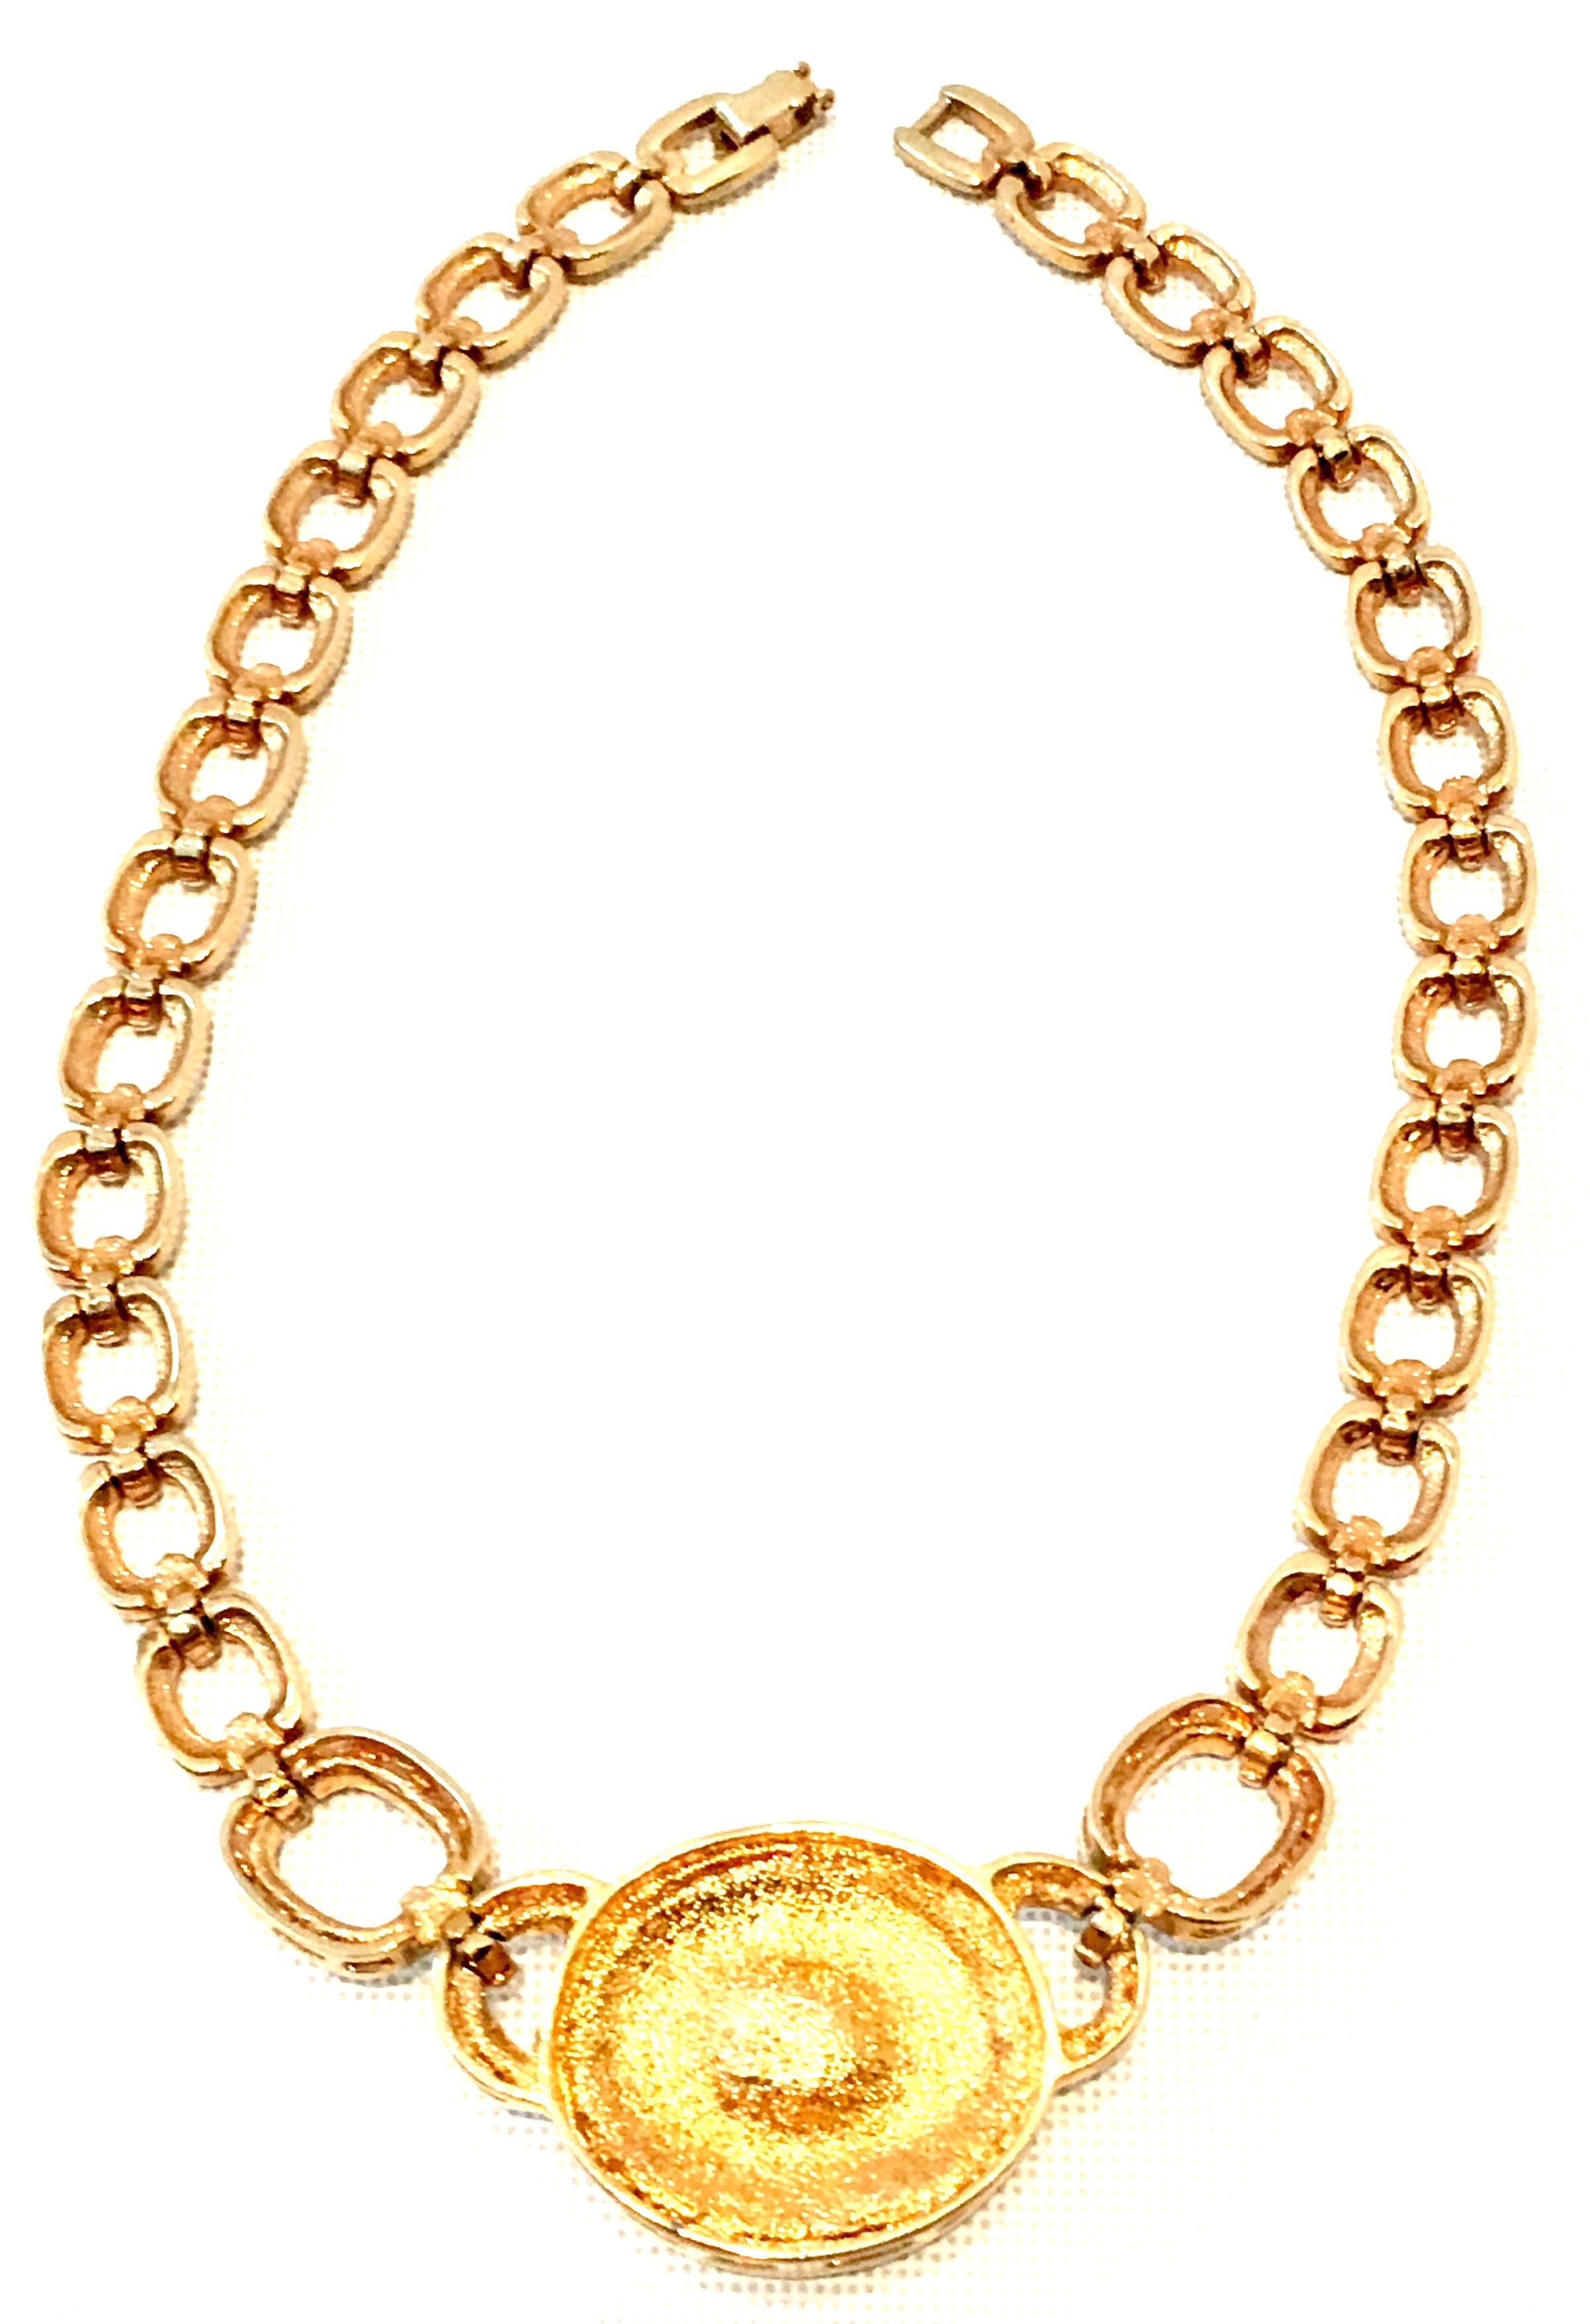 20th Century Christian Dior Style Gold & Austrian Crystal Choker Style Necklace 7